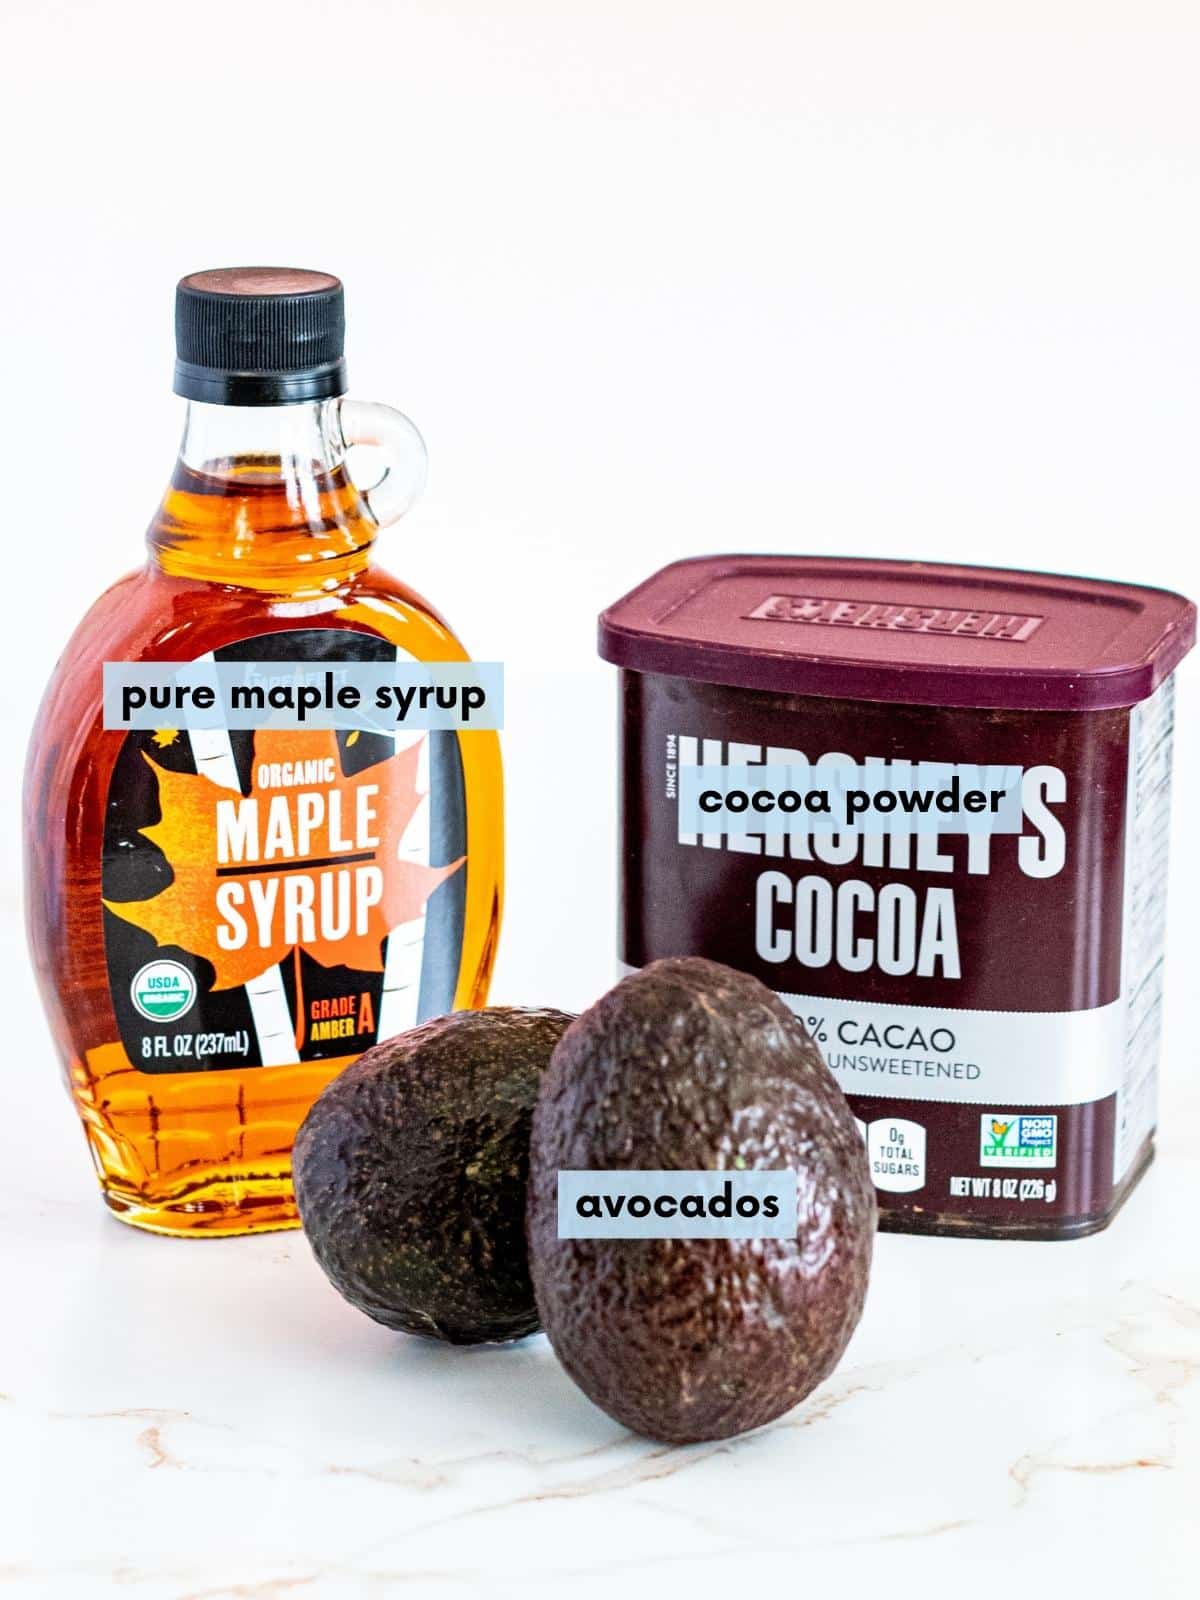 Avocados, bottle of pure maple syrup, and a container of cocoa powder.